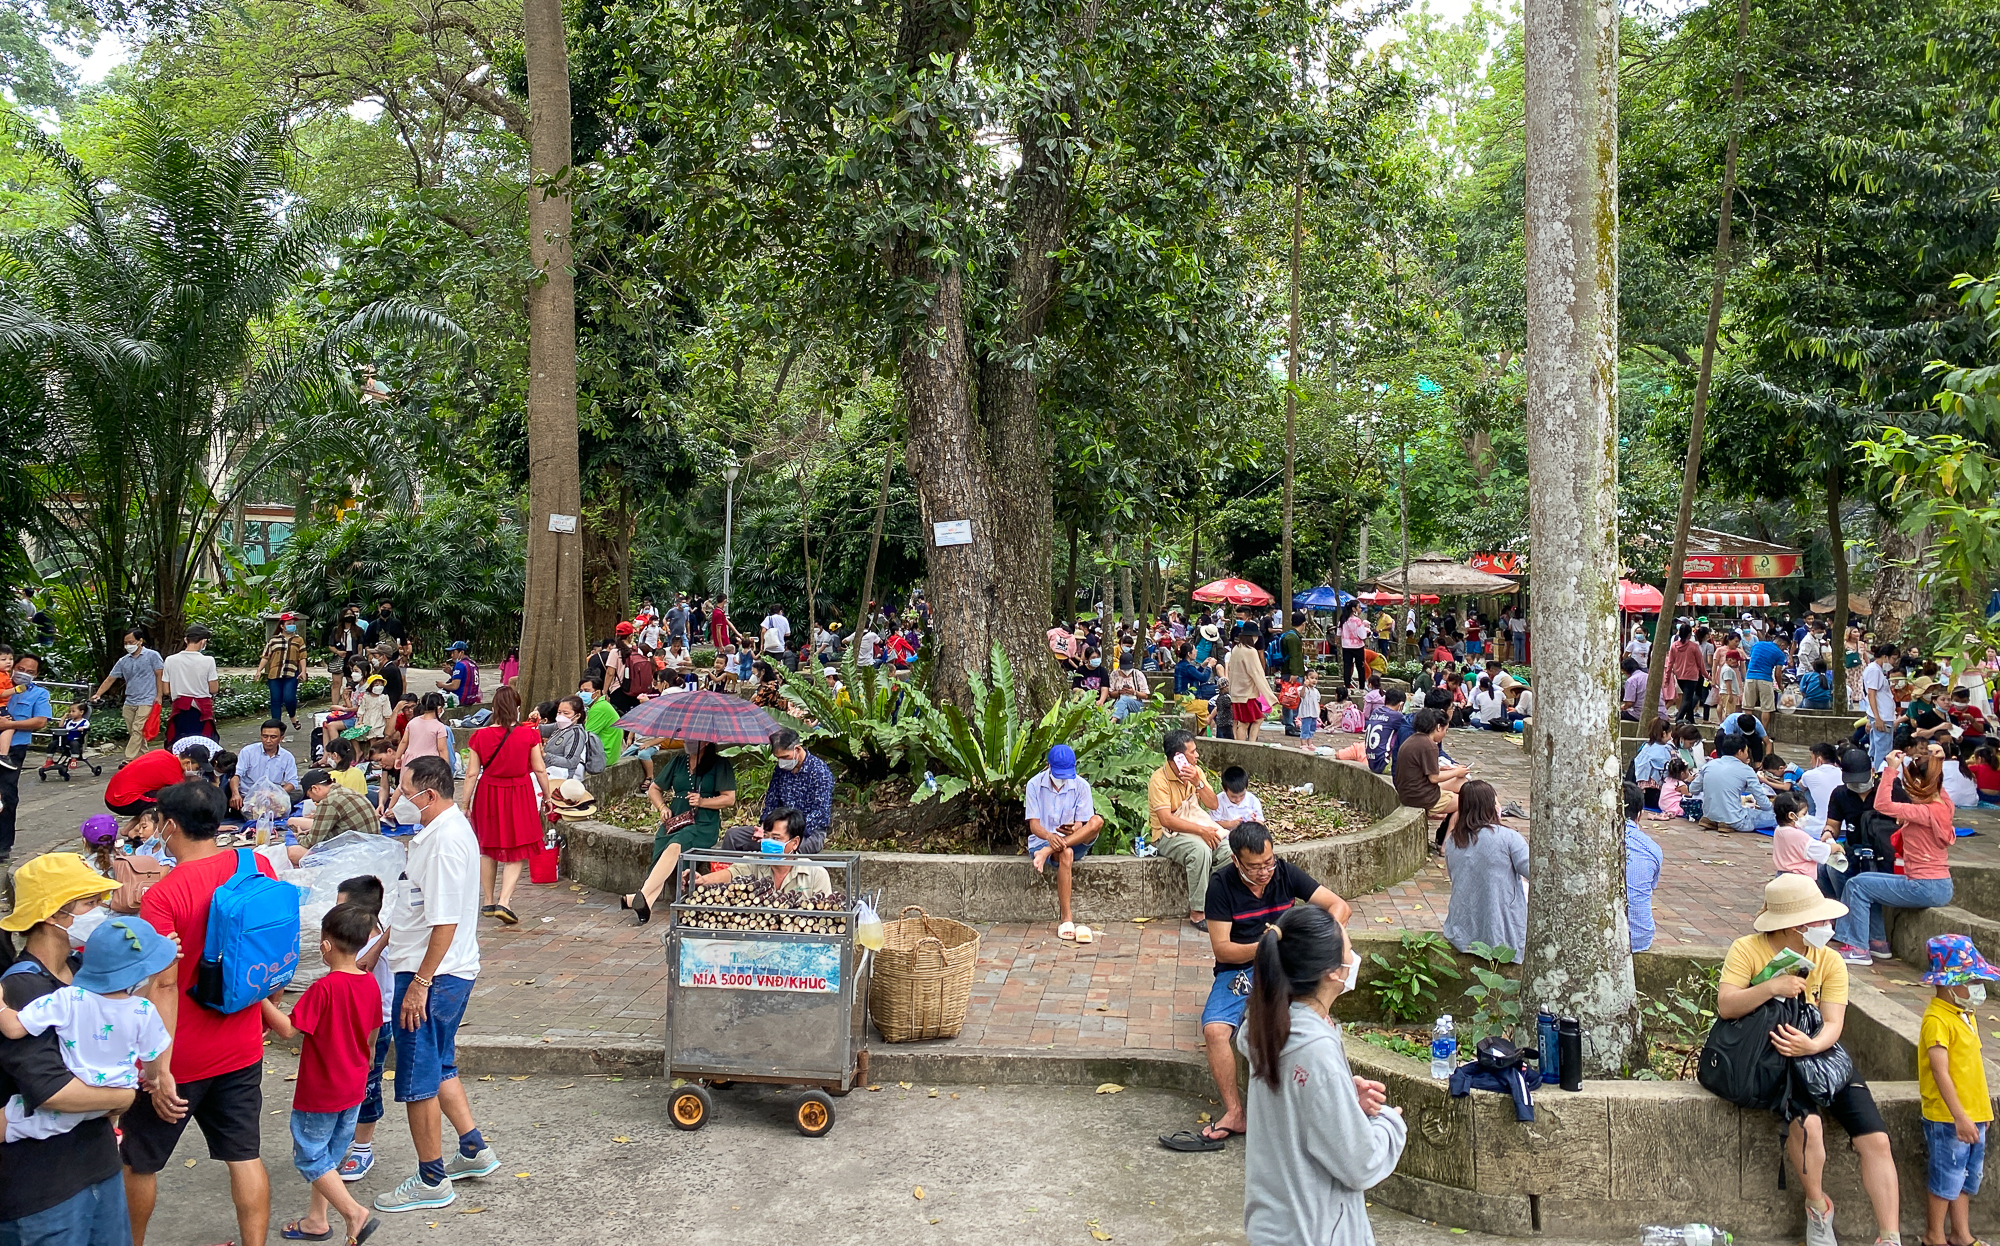 Saigon Zoo and Botanical Garden is crowded with people, guests bring suitcases to camp on the occasion of Hung King's death anniversary - Photo 15.